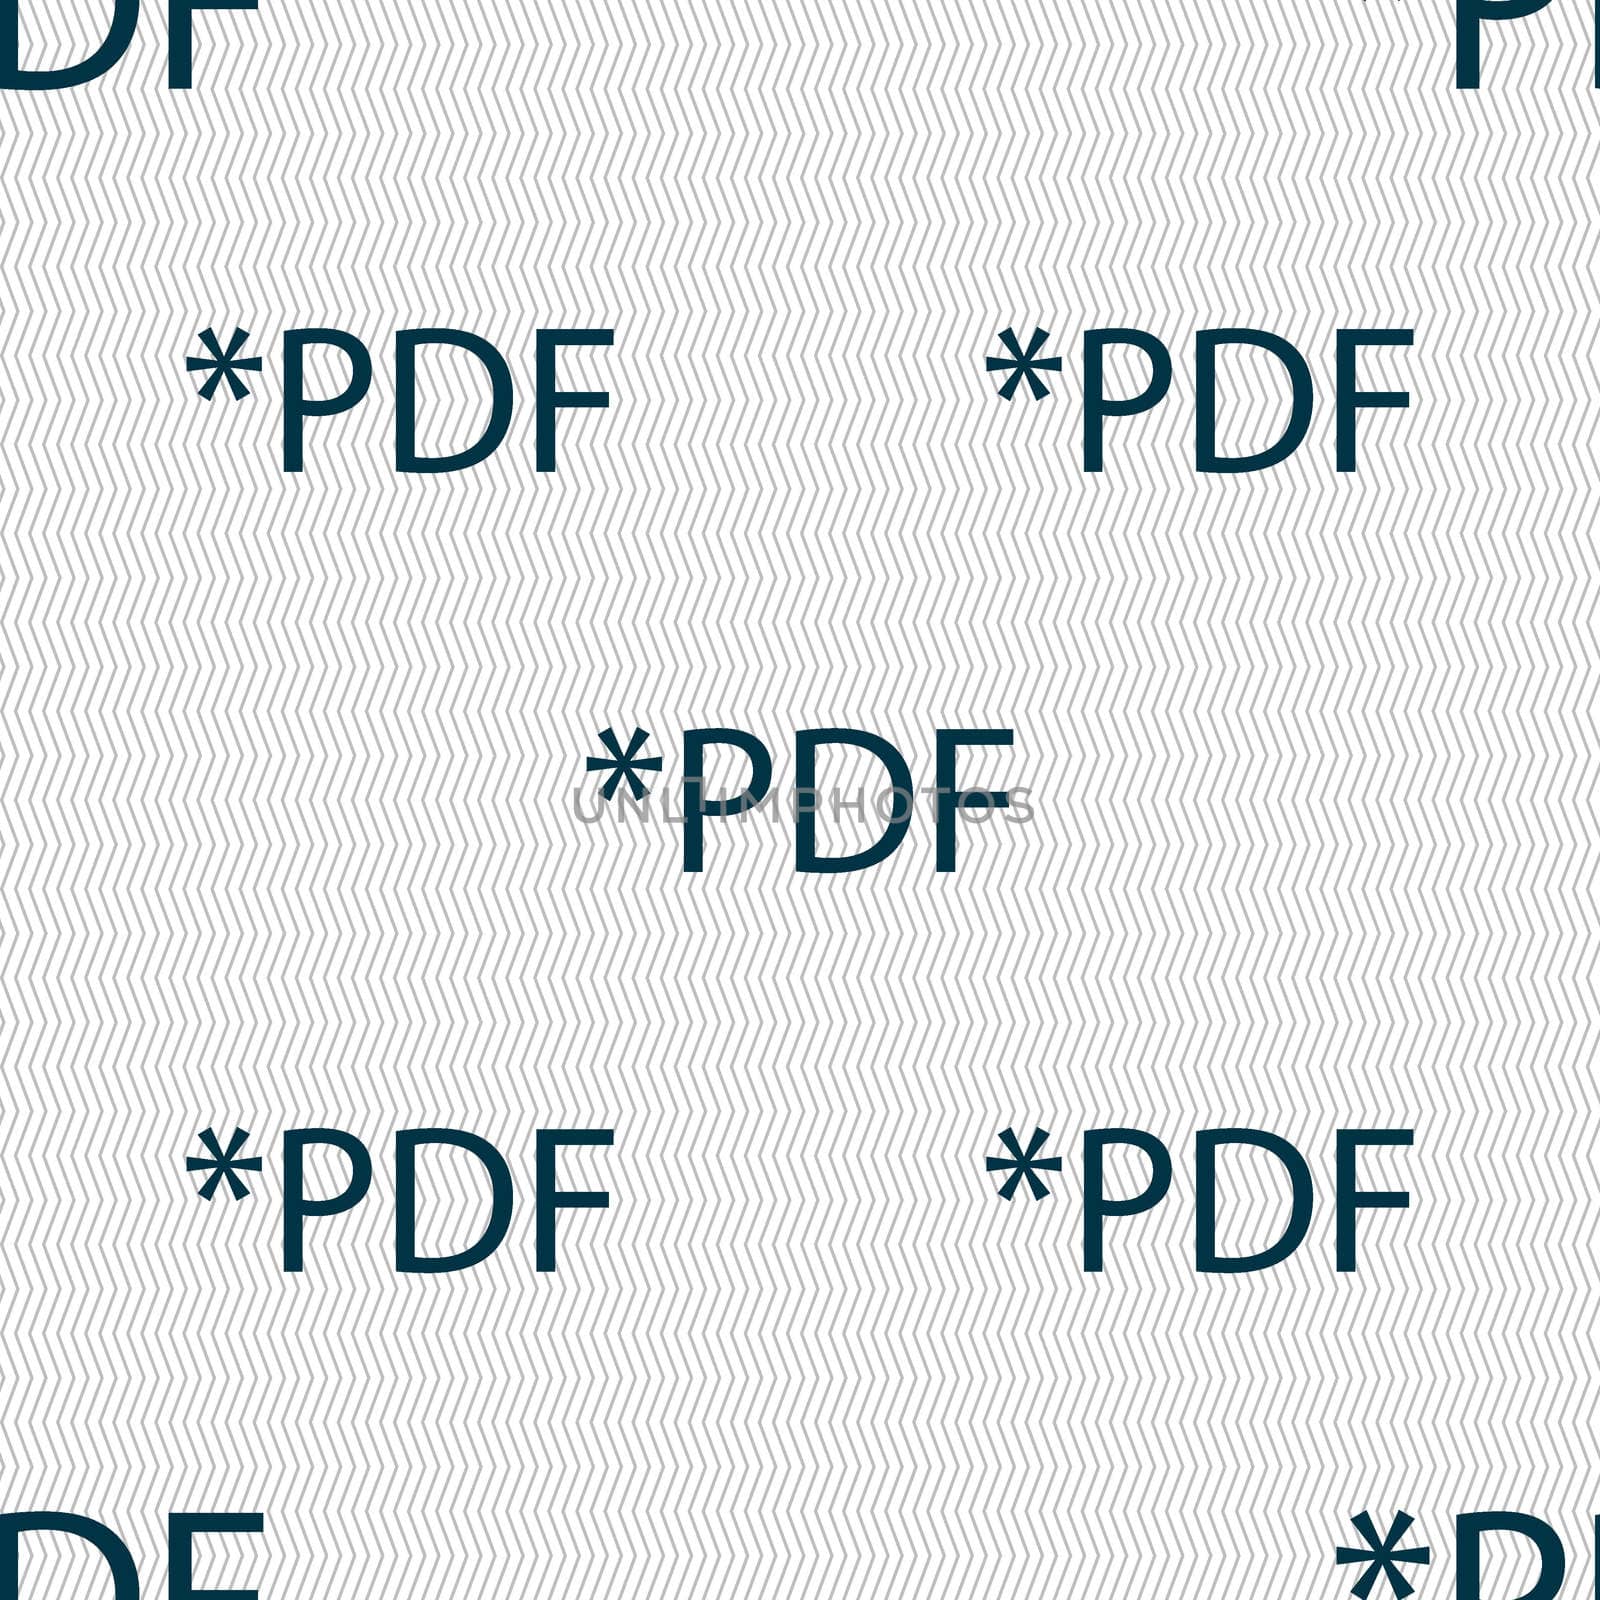 PDF file document icon. Download pdf button. PDF file extension symbol. Seamless abstract background with geometric shapes. illustration